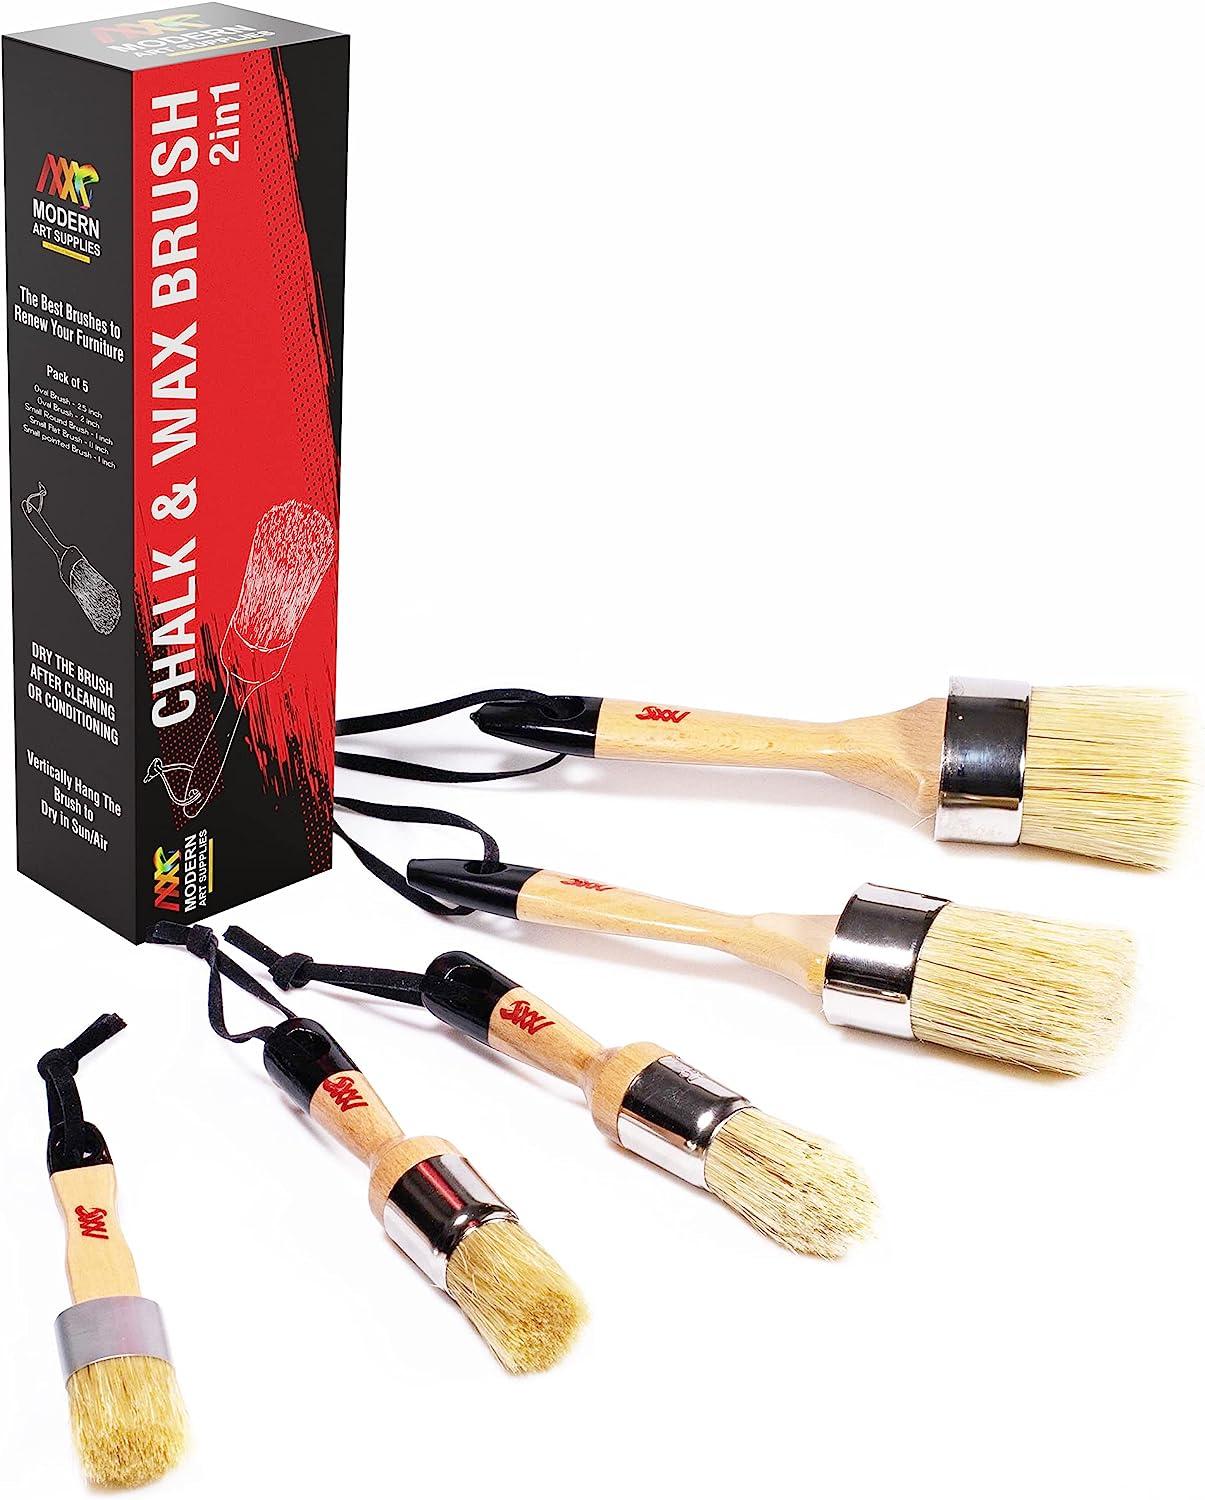 Chalk Wax Paint Brush 5PCs set including 3 small paint brushes for  furniture painting and 2 large chalk brushes, bristle paint brushes set  compatible with Annie Sloan chalk paint, fusion mineral paint 5 PCS